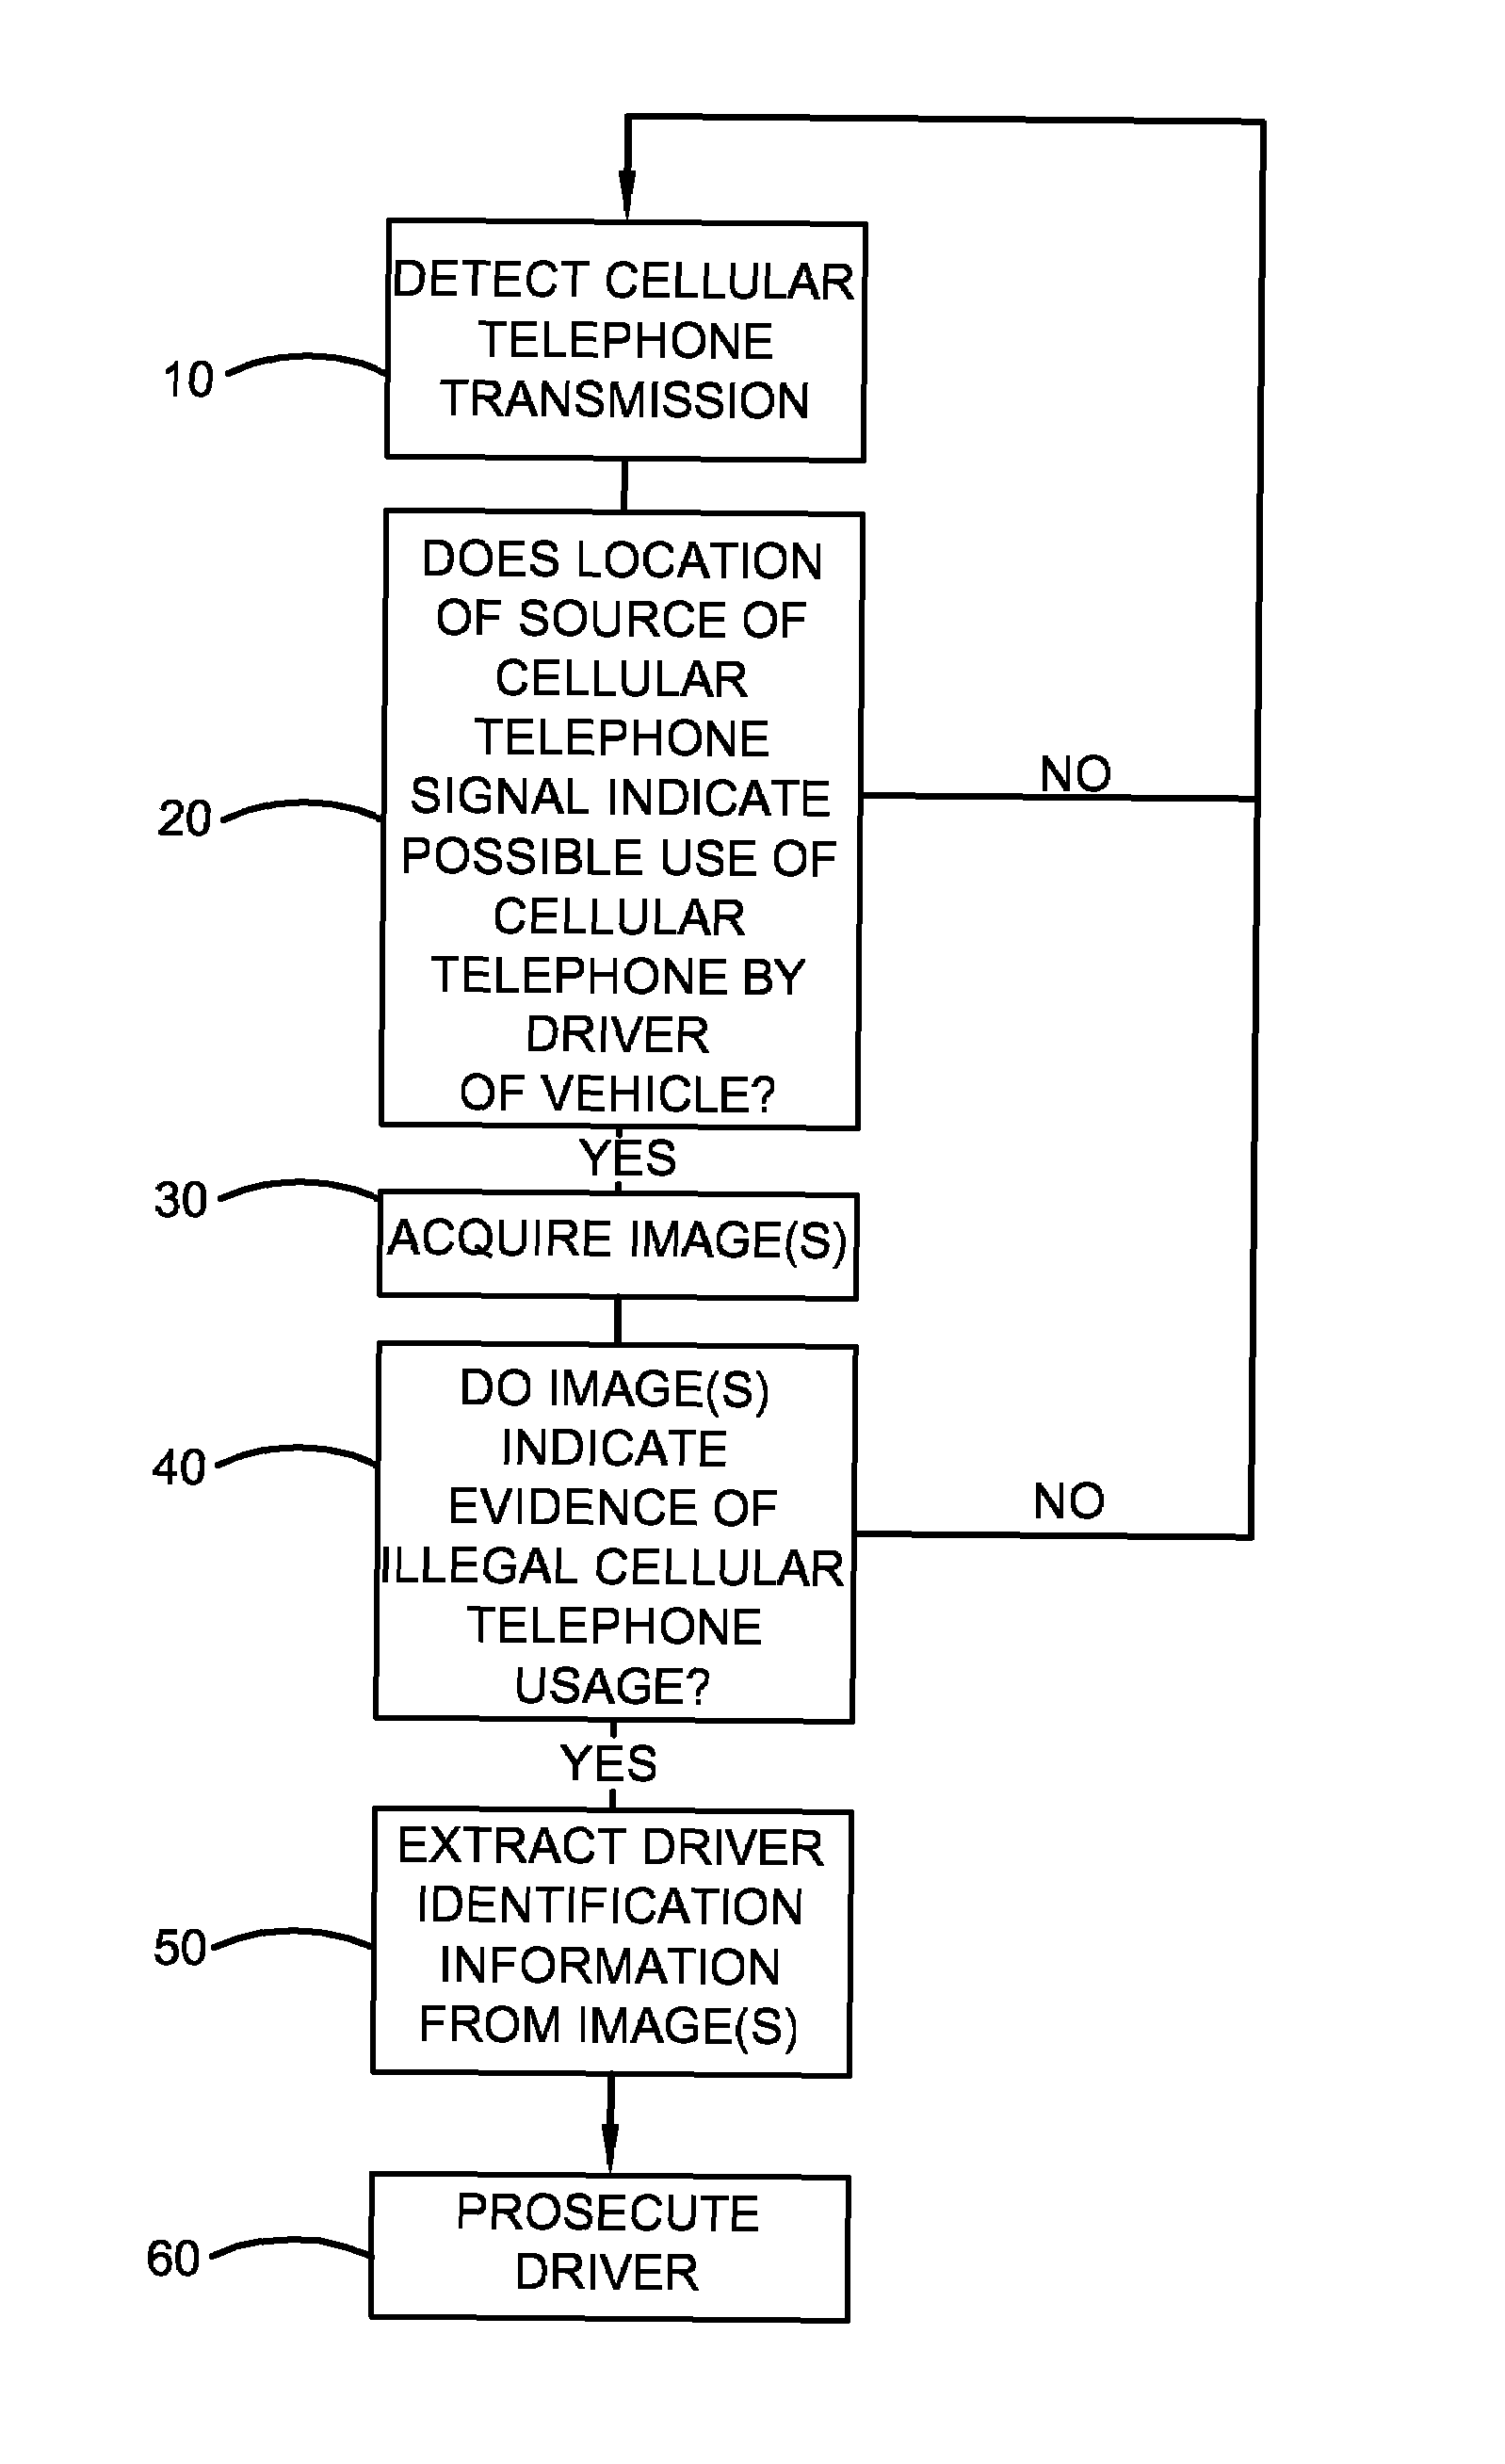 Method and system for automated detection of mobile telephone usage by drivers of vehicles